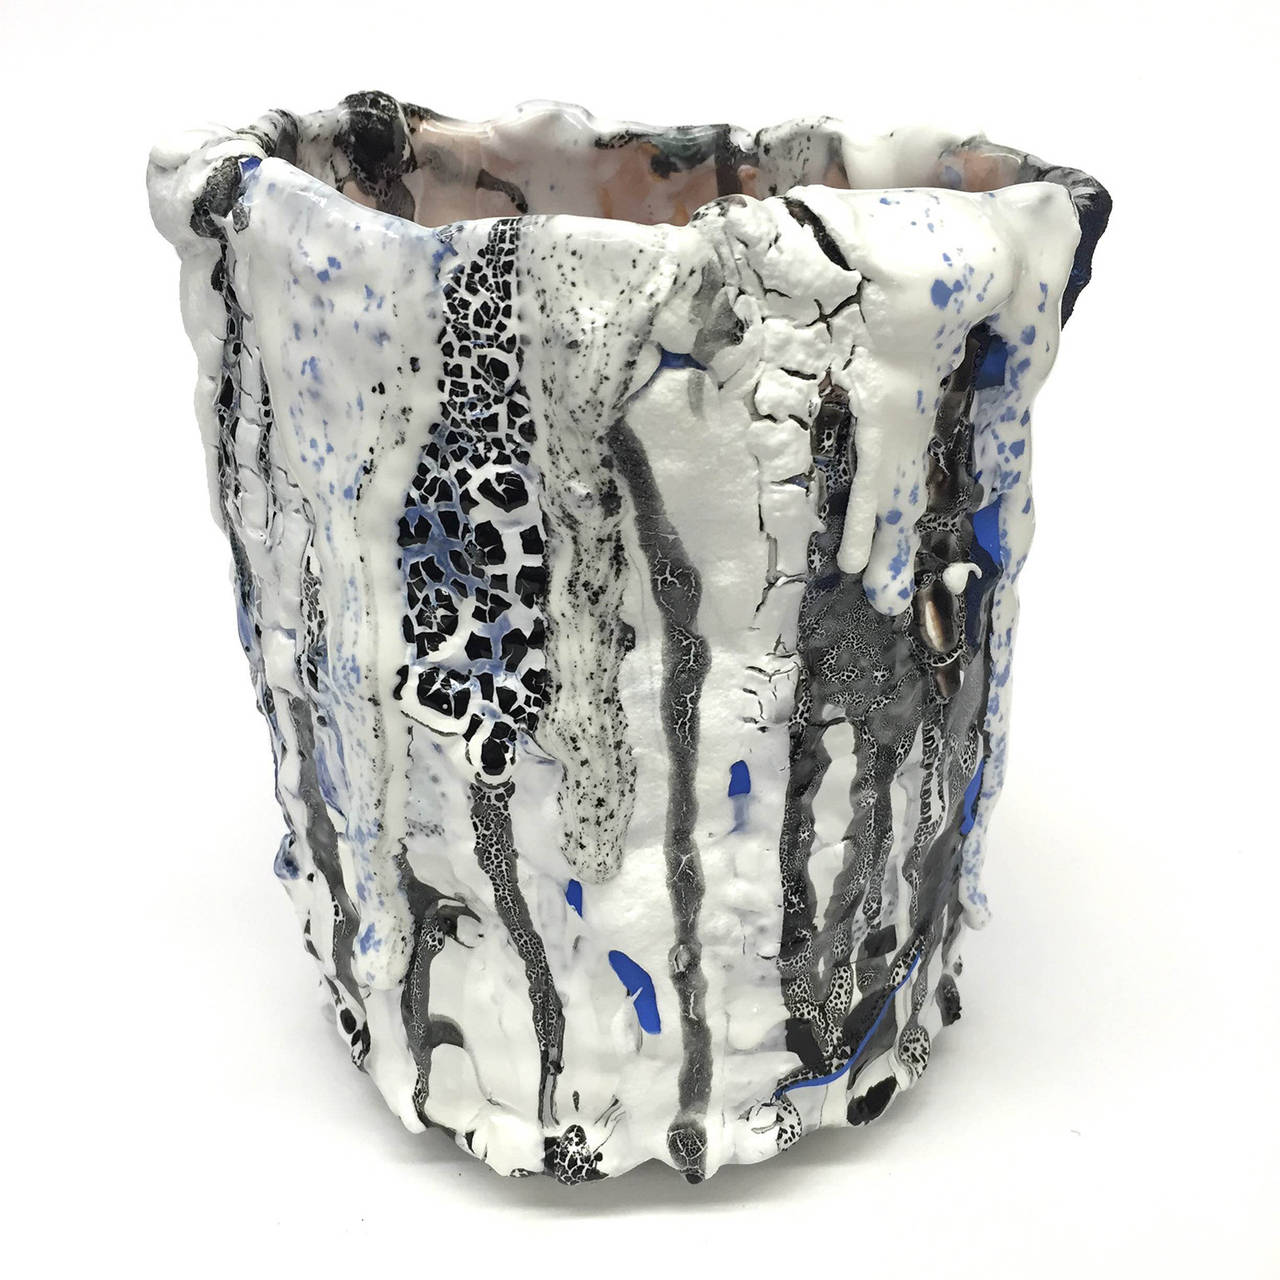 Contemporary ceramic vessel by LA based mixed-media sculptor Brian Rochefort for Kelly Behun Studio. Highly textured and worked surface resulting from multiple firings. Multicolored glazes including white, black, cobalt and light pink on the